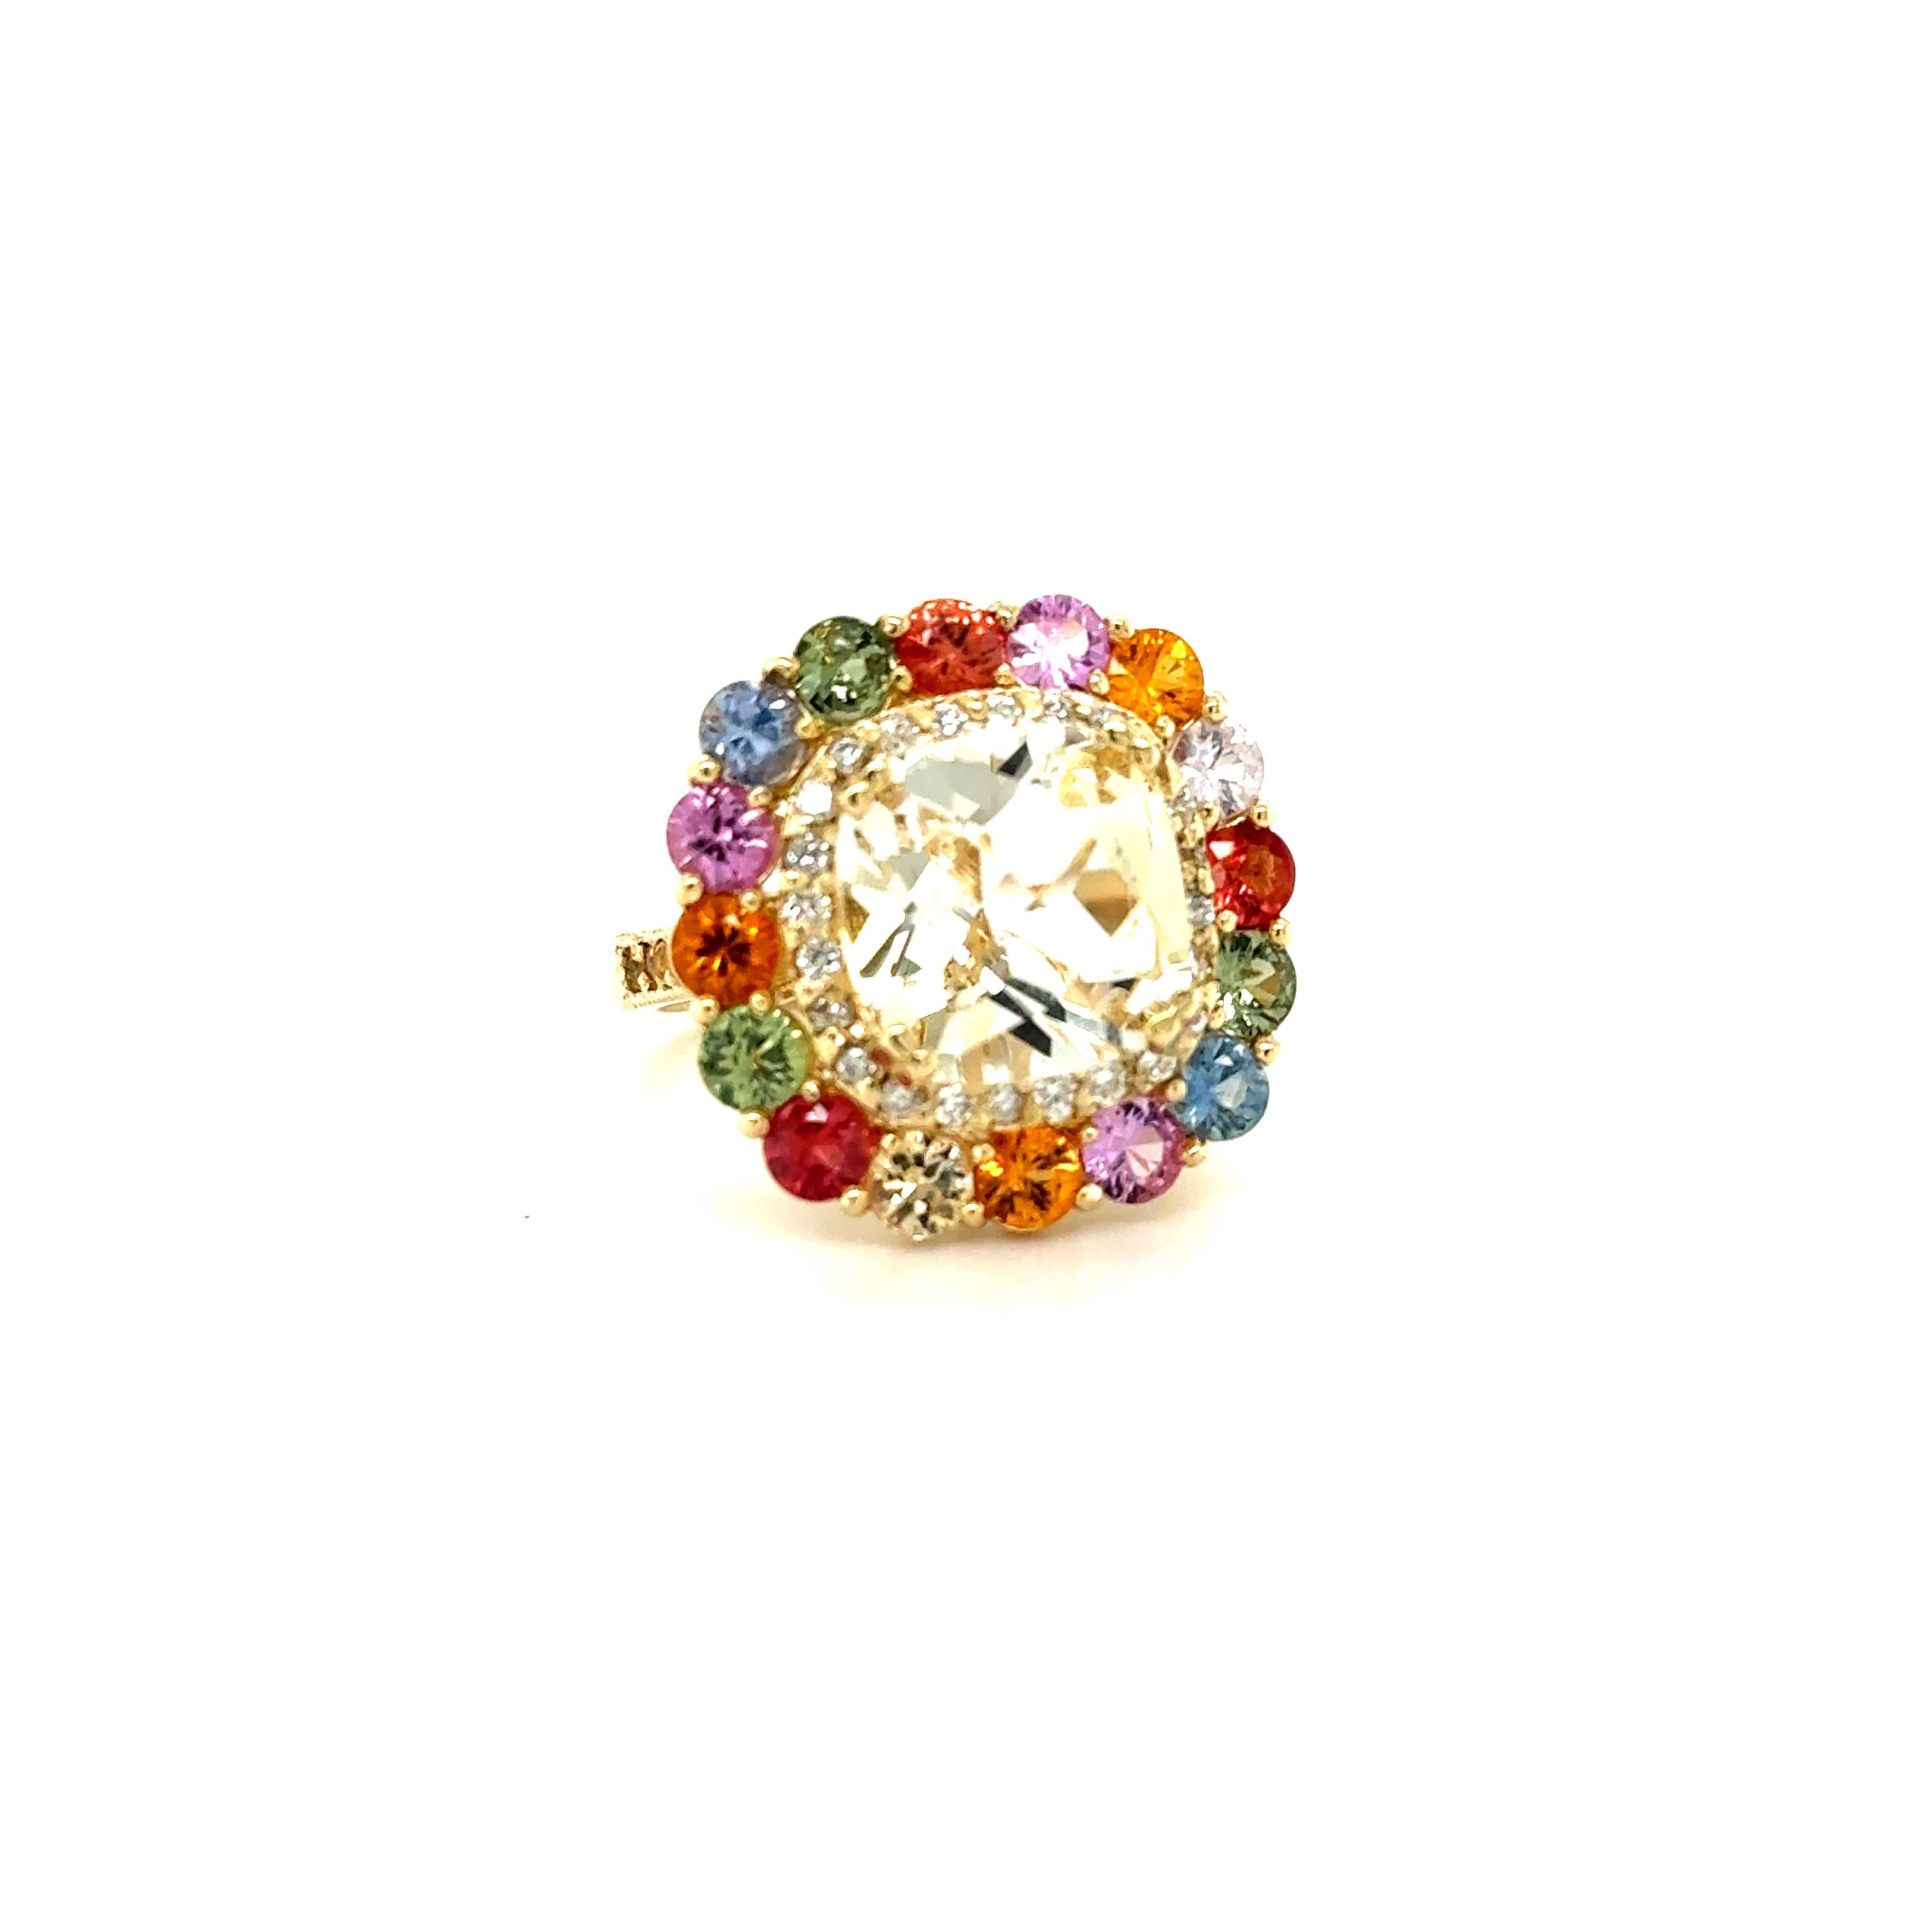 8.12 Carat Citrine Multi-Color Sapphire Diamond Yellow Gold Cocktail Ring

This gorgeous ring has a beautiful Cushion Cut Champagne Citrine Quartz weighing 4.63 Carats and is surrounded by 16 Multi-Color Sapphires weighing 2.96 Carats and 24 Round